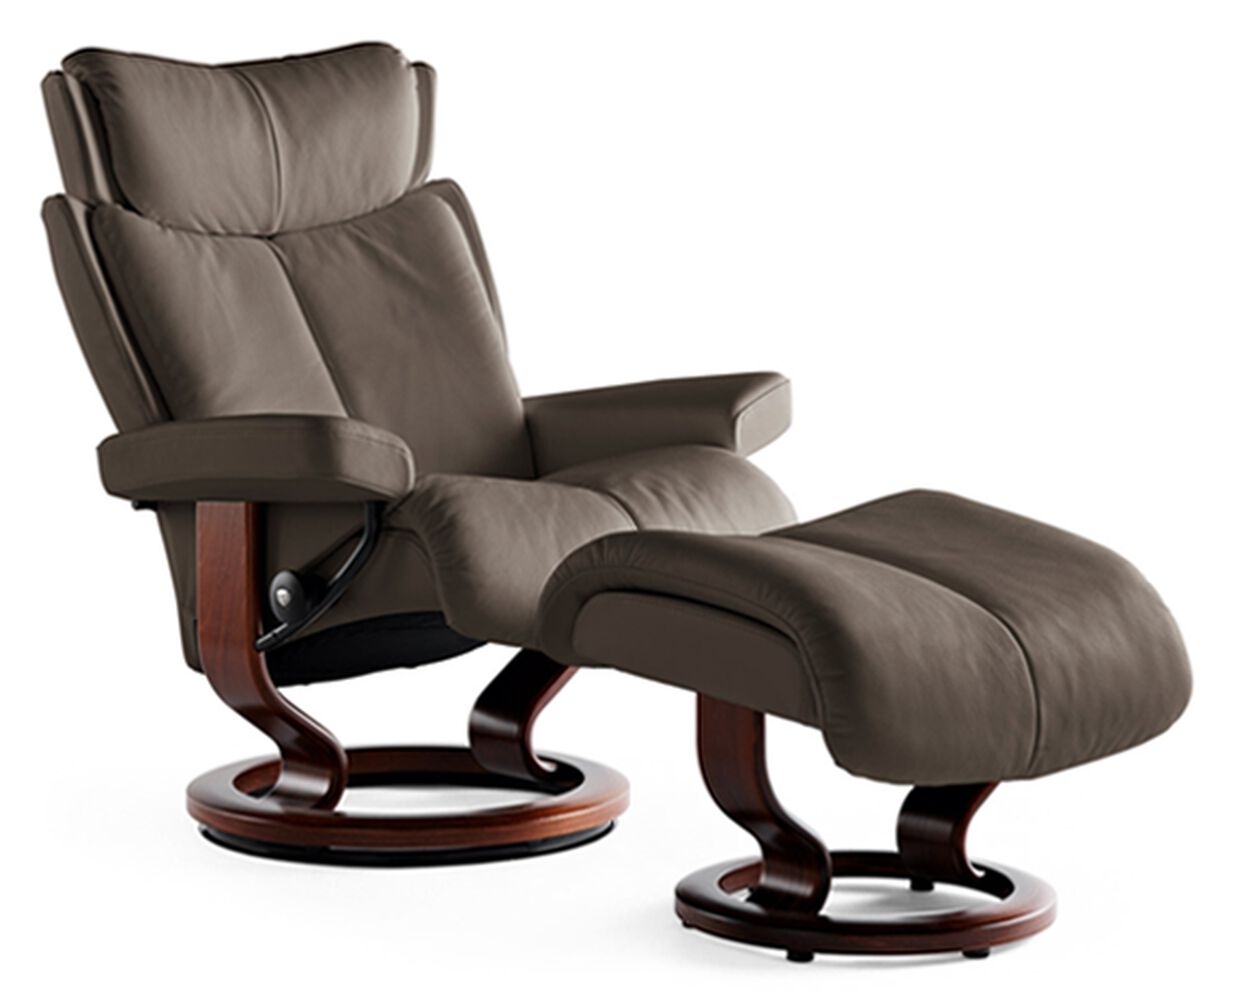 Small Modern Recliners Ideas On Foter